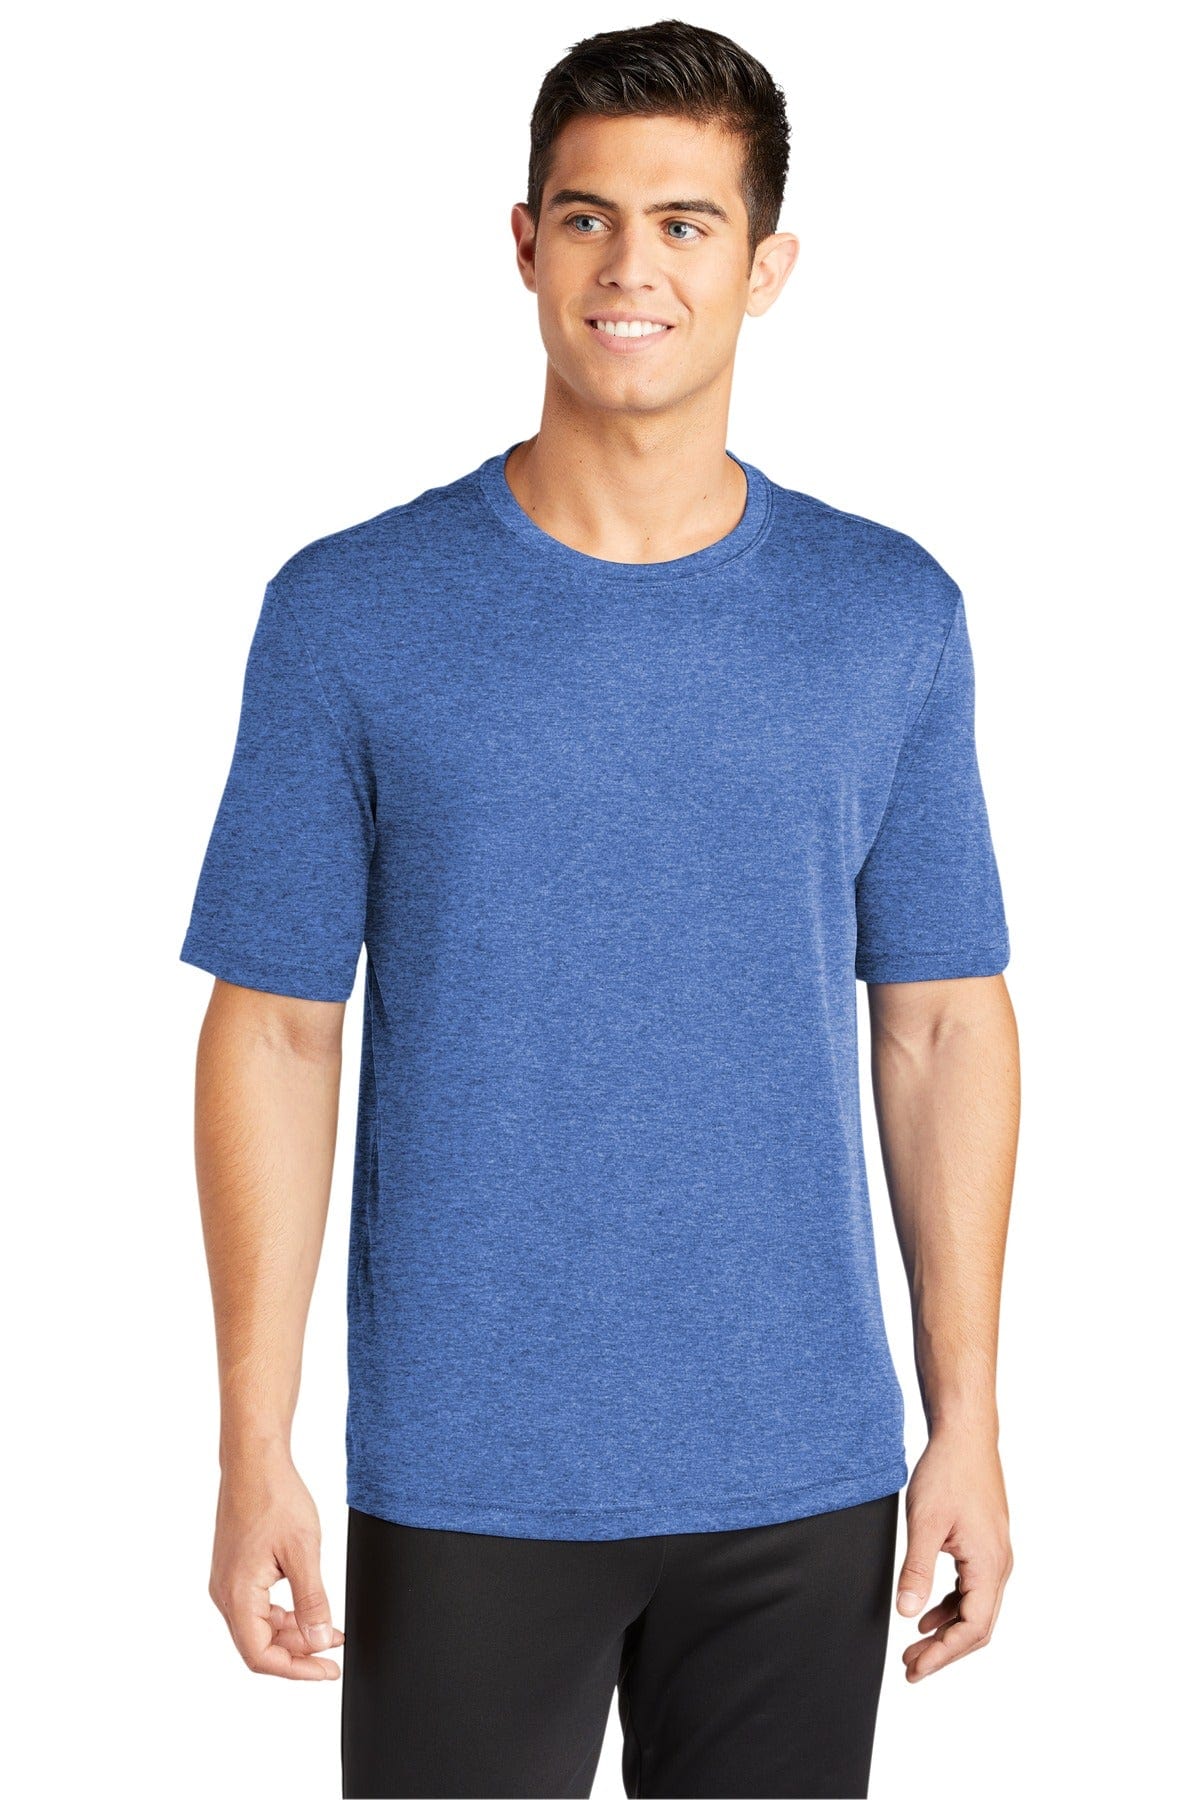 Sport-Tek PosiCharge Competitor Tee. ST350, Extended Colors